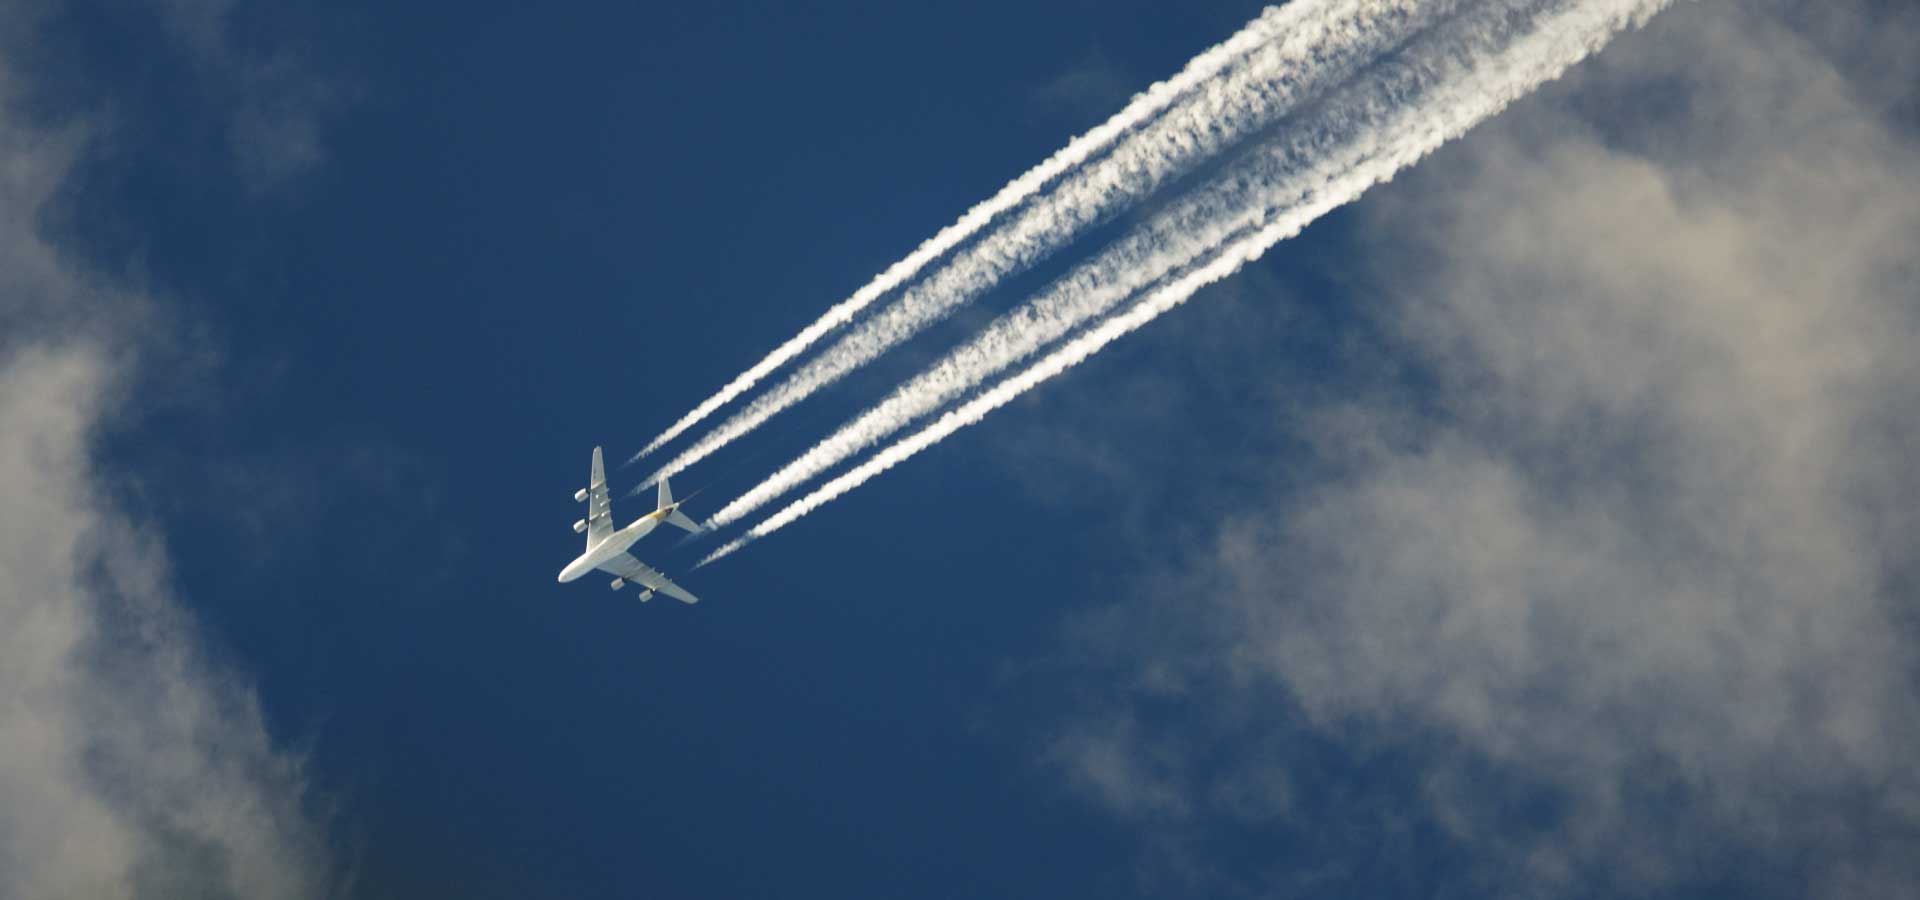 Commercial aircraft in sky with contrails